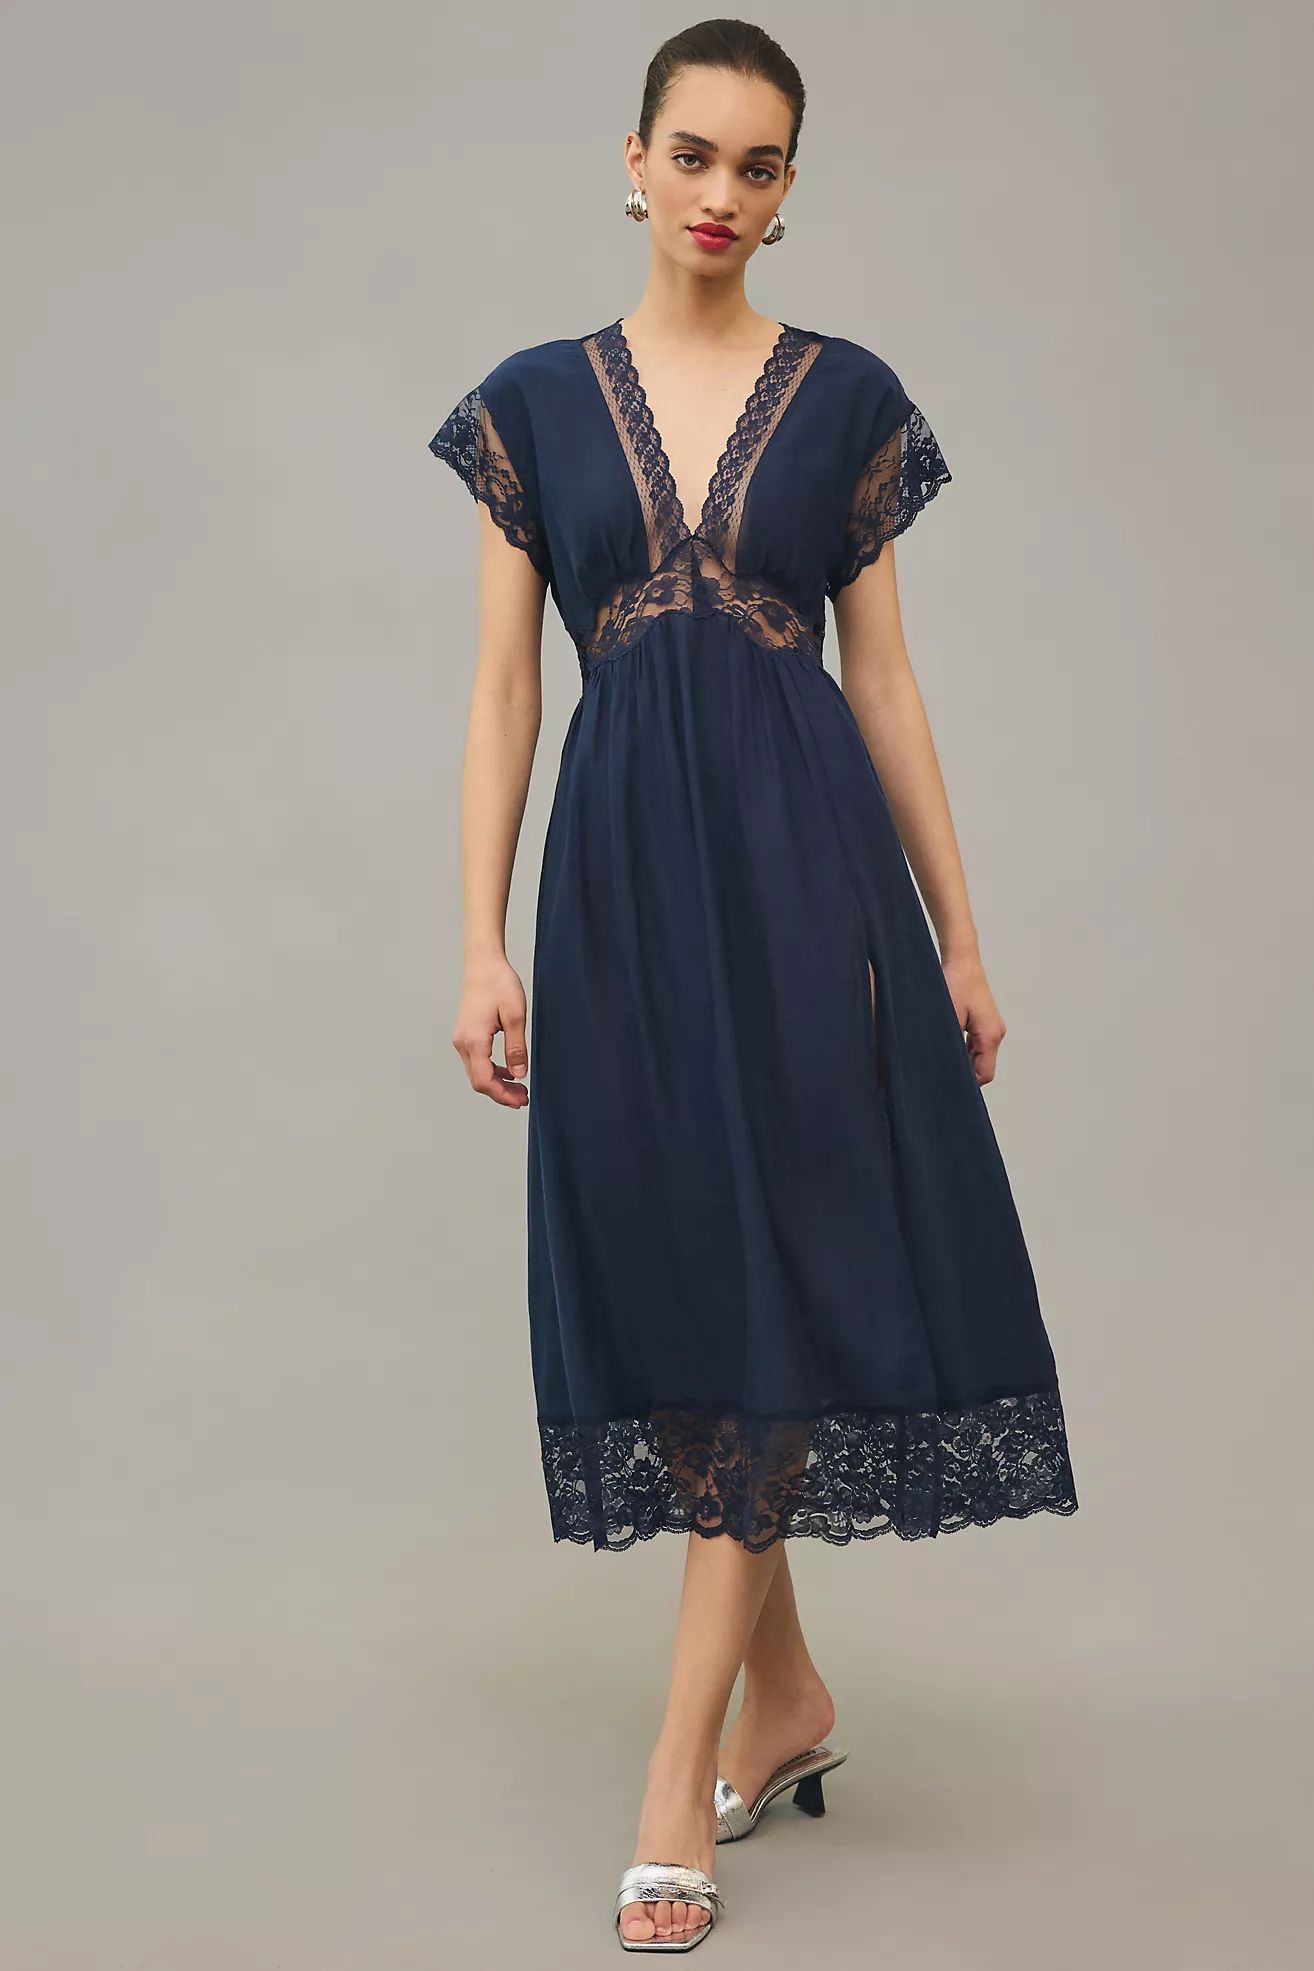 By Anthropologie Sheer Maxi Dress | Anthropologie (US)